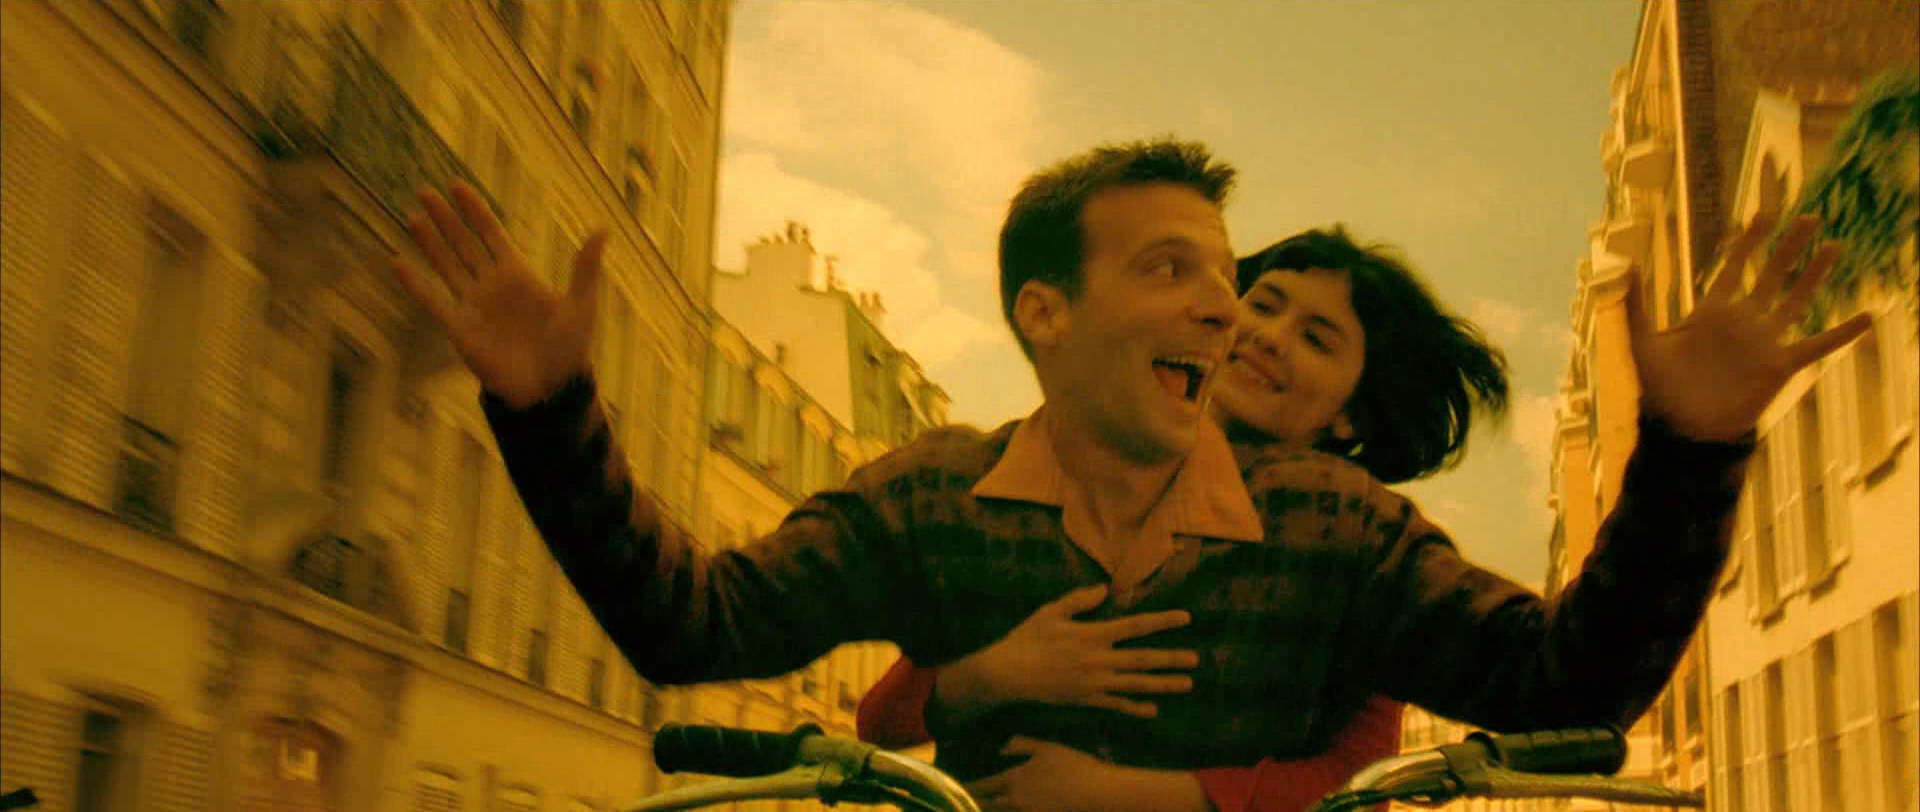 Amelie And Remy Ride Through The Streets Of Paris - Amelie Poulain And Nino - HD Wallpaper 